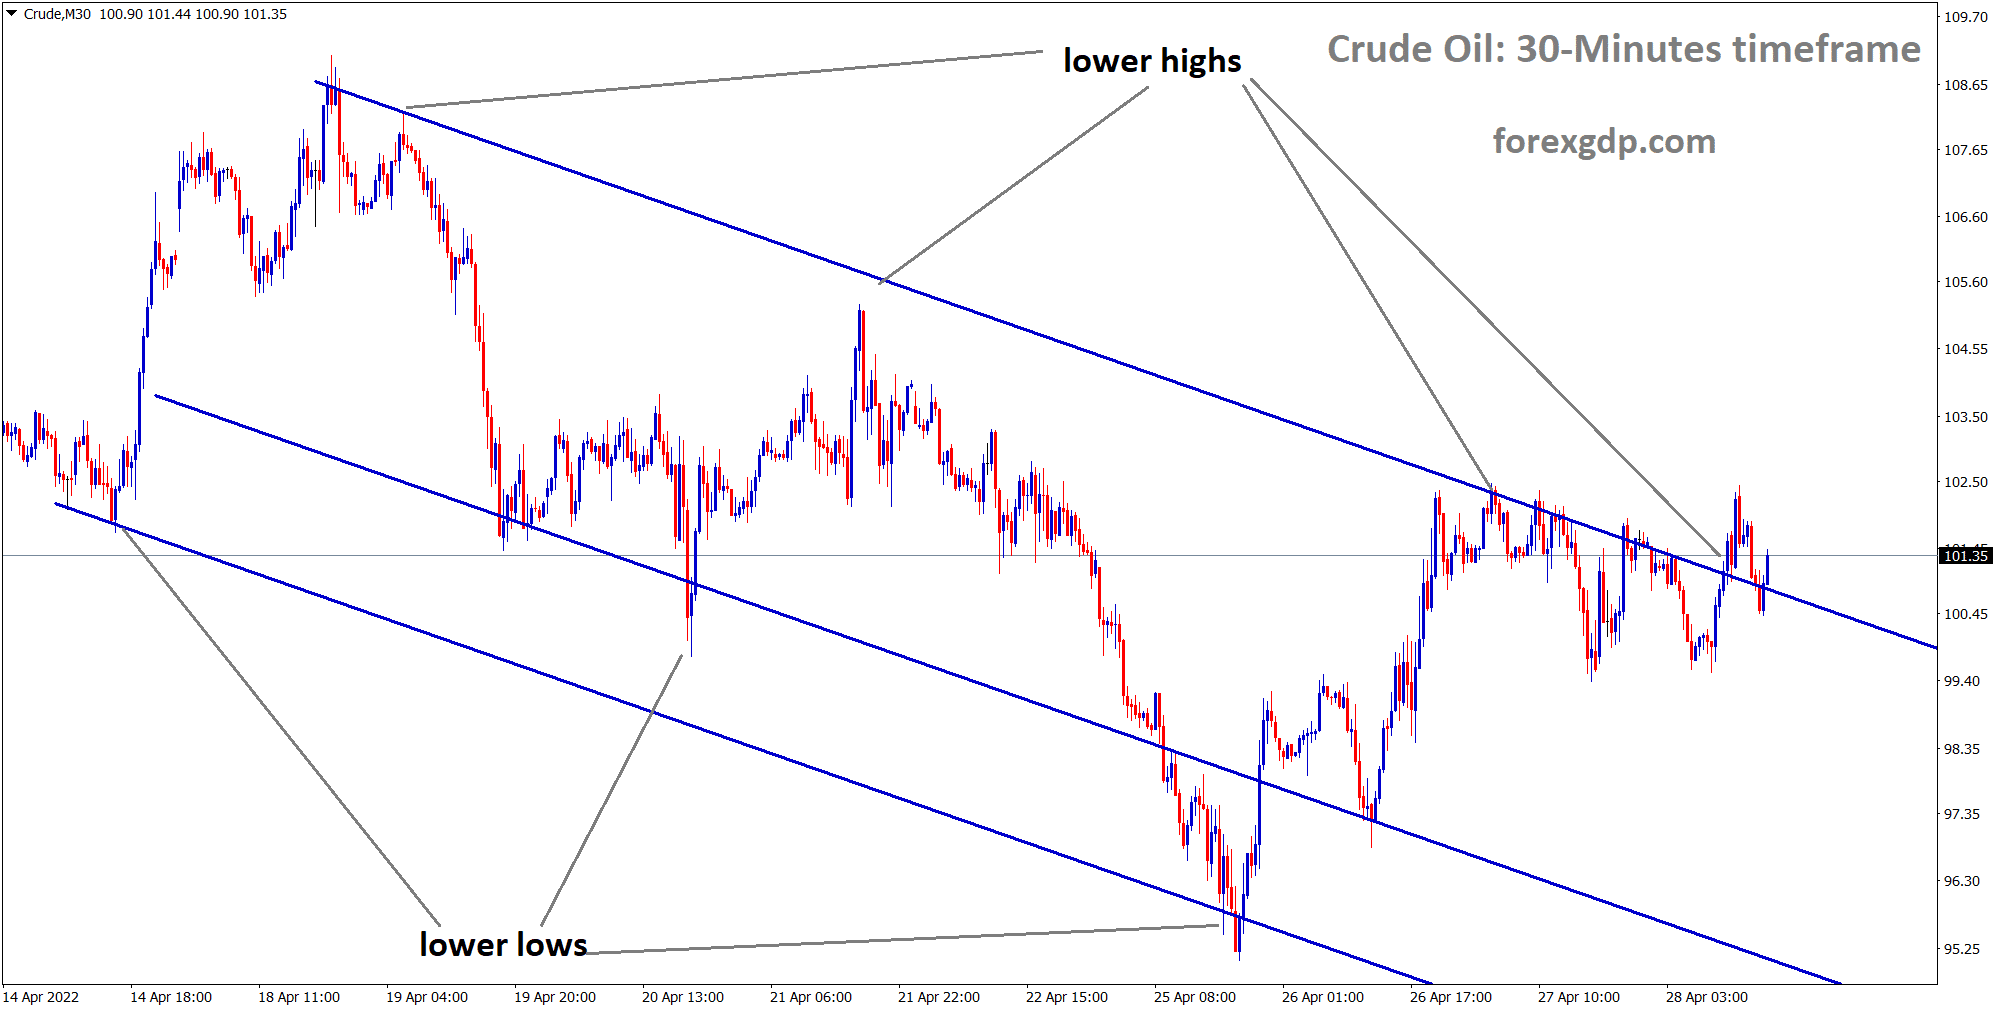 Crude Oil moving in a descending channel and reached lower highs